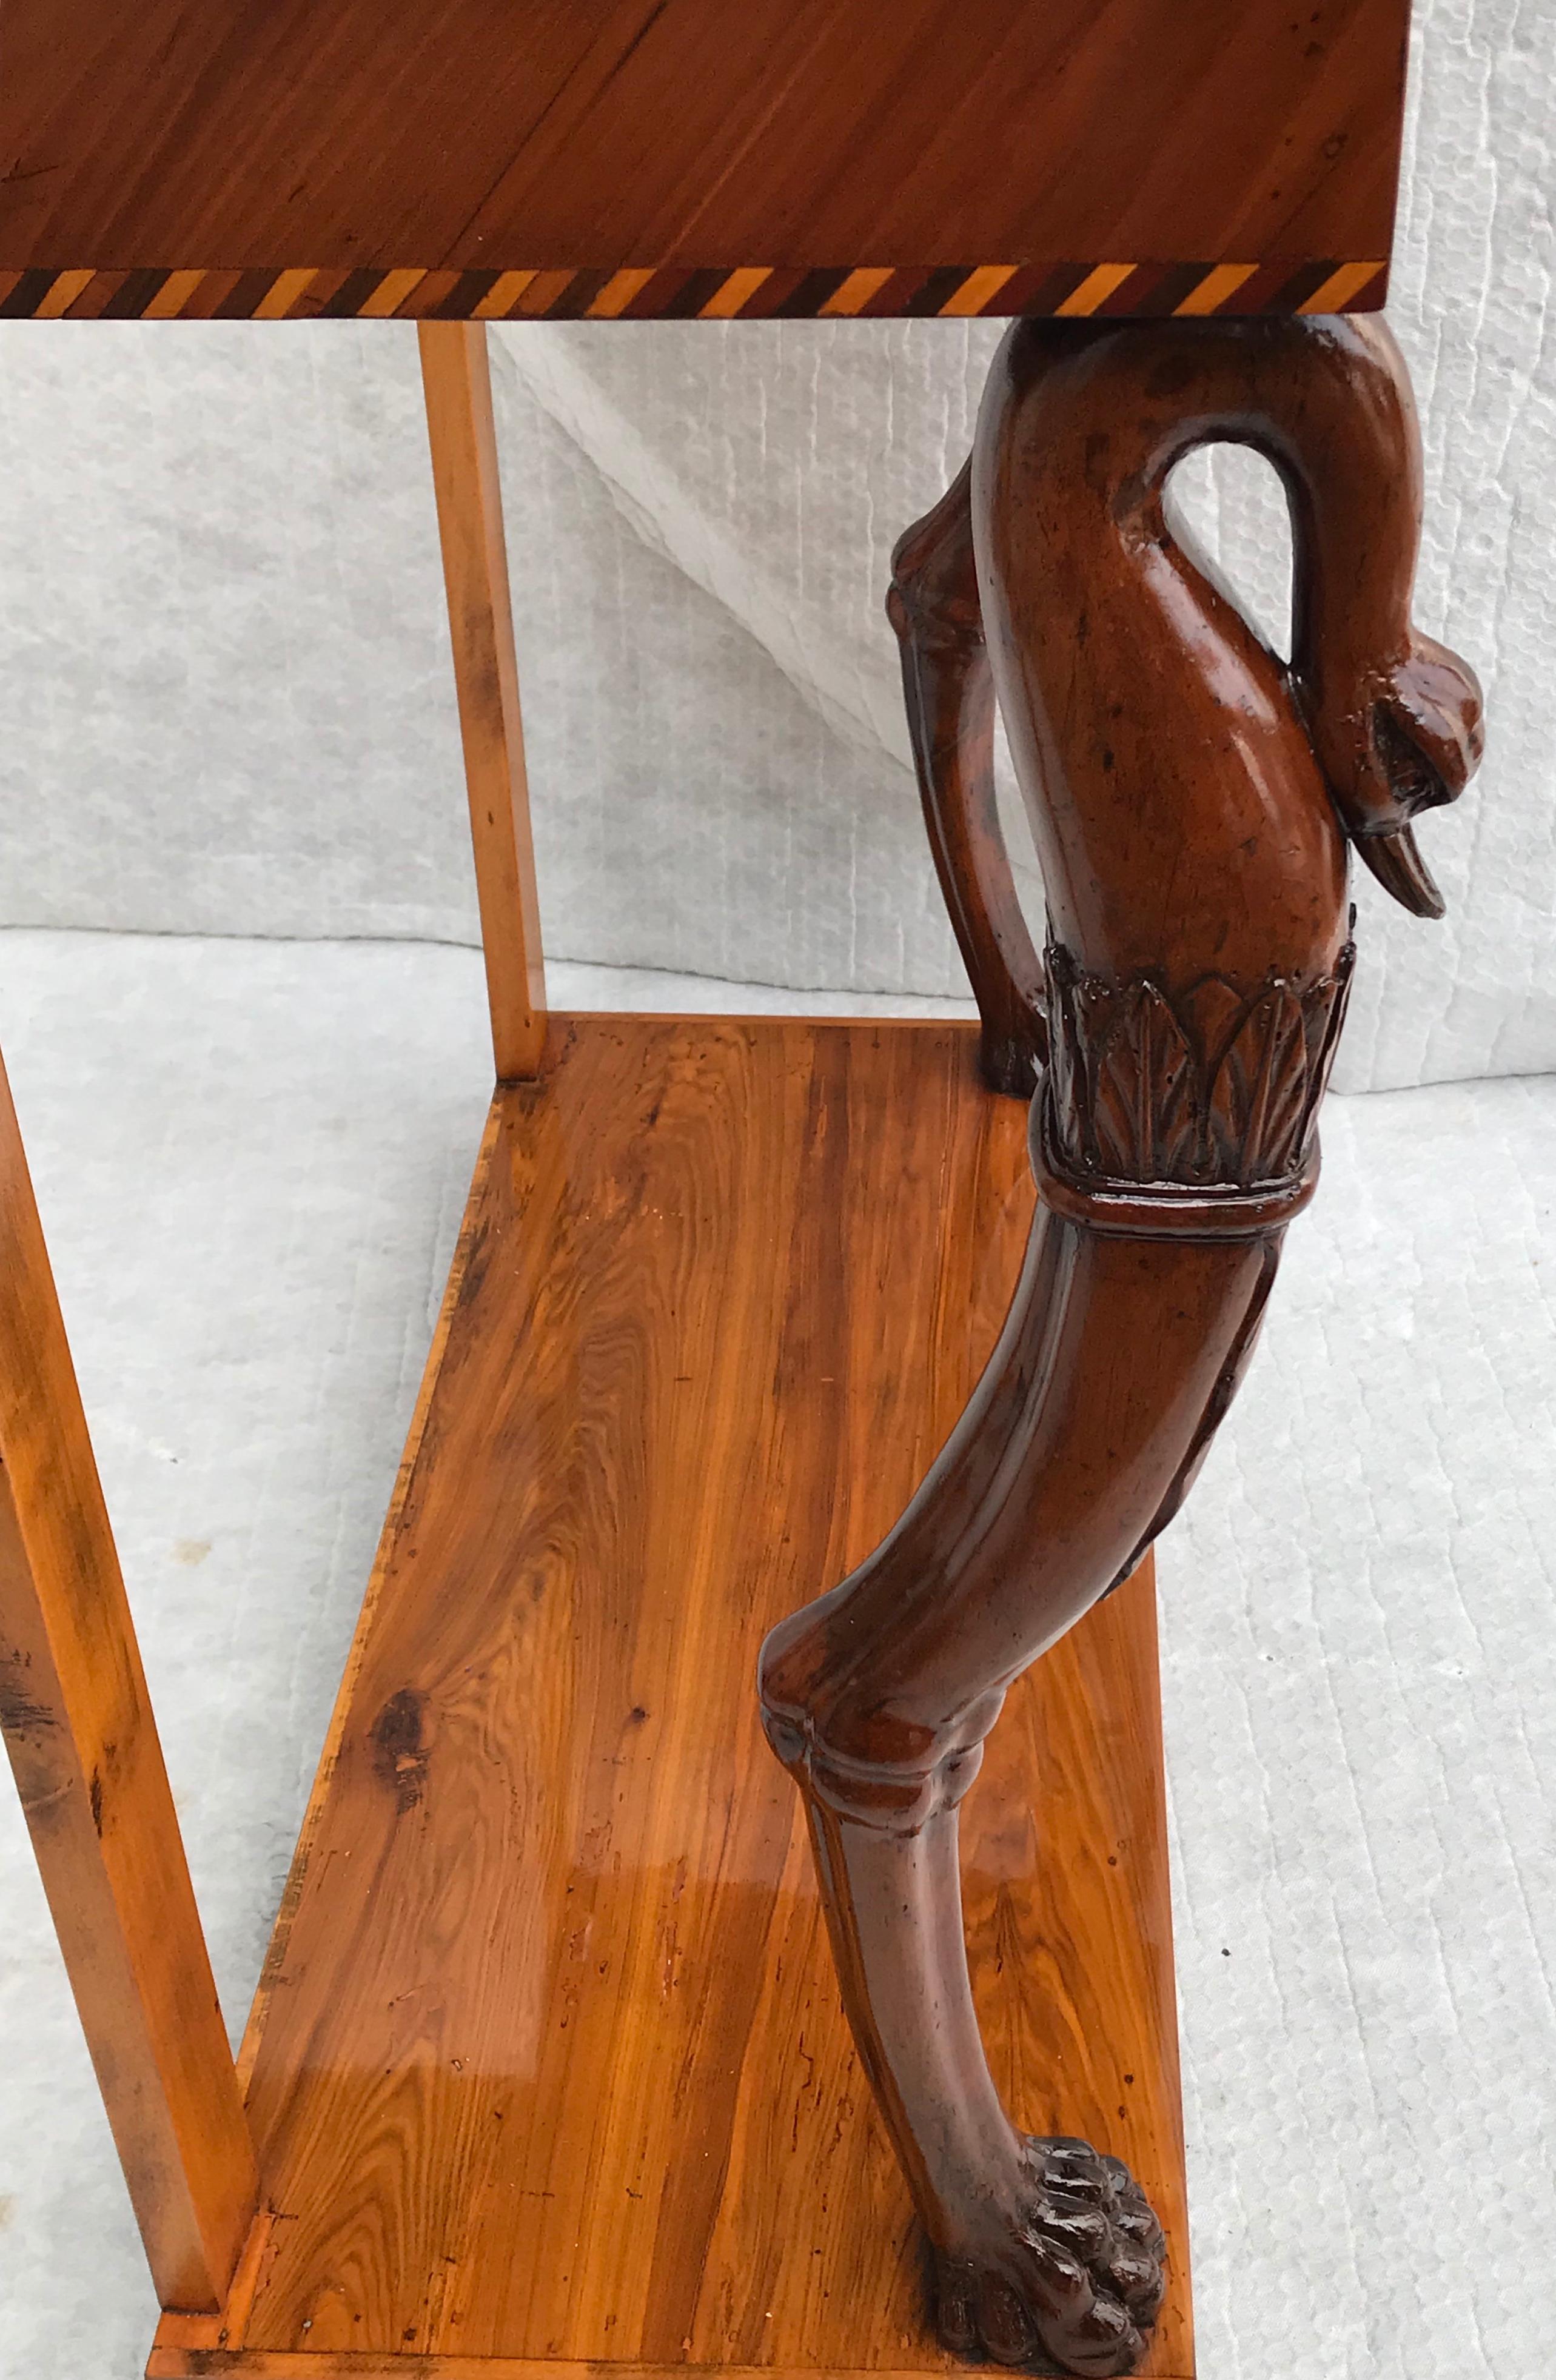 Biedermeier console table, Southern Germany 1820, cherrywood veneer with marquetry in mahogany and elmwood. Unique small console table, the front legs with beautiful carved swan heads. The table is in very good condition, refinished and French